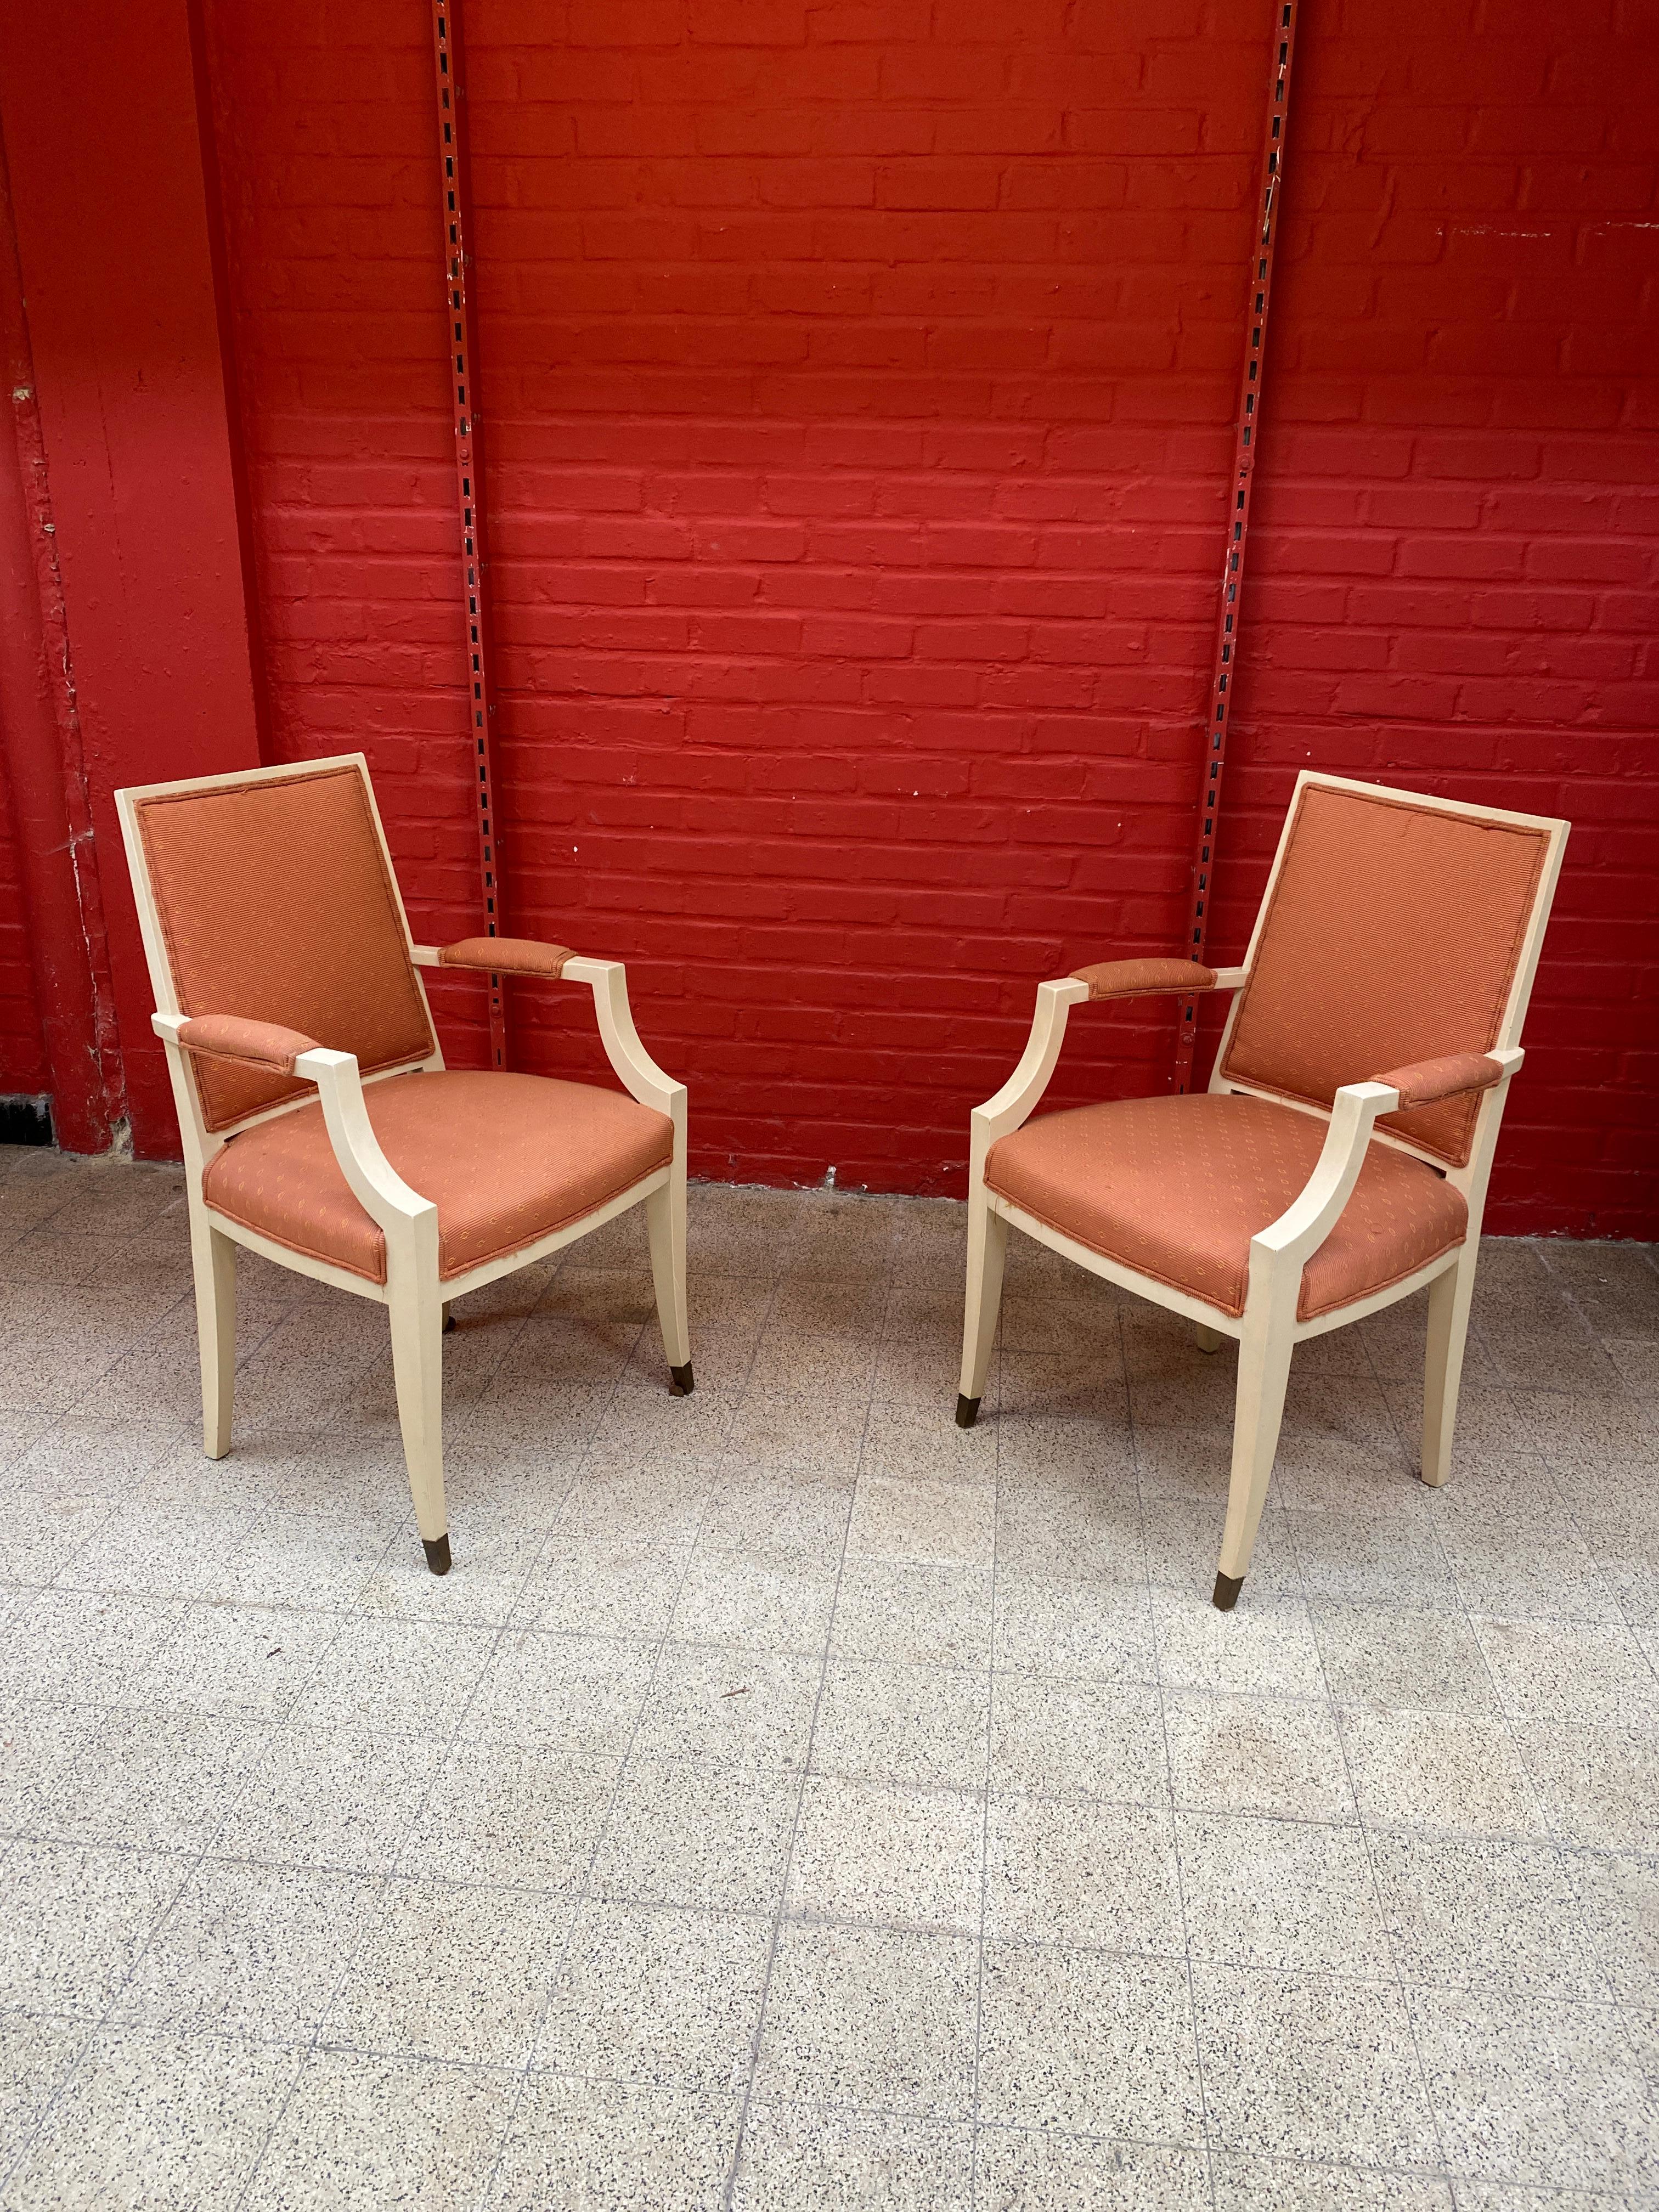 1940s pair of French Art Deco armchairs in the style of André Arbus
Painted wood,
Upholstery redone, slightly dirty fabric
A series of 6 model chairs are also available.